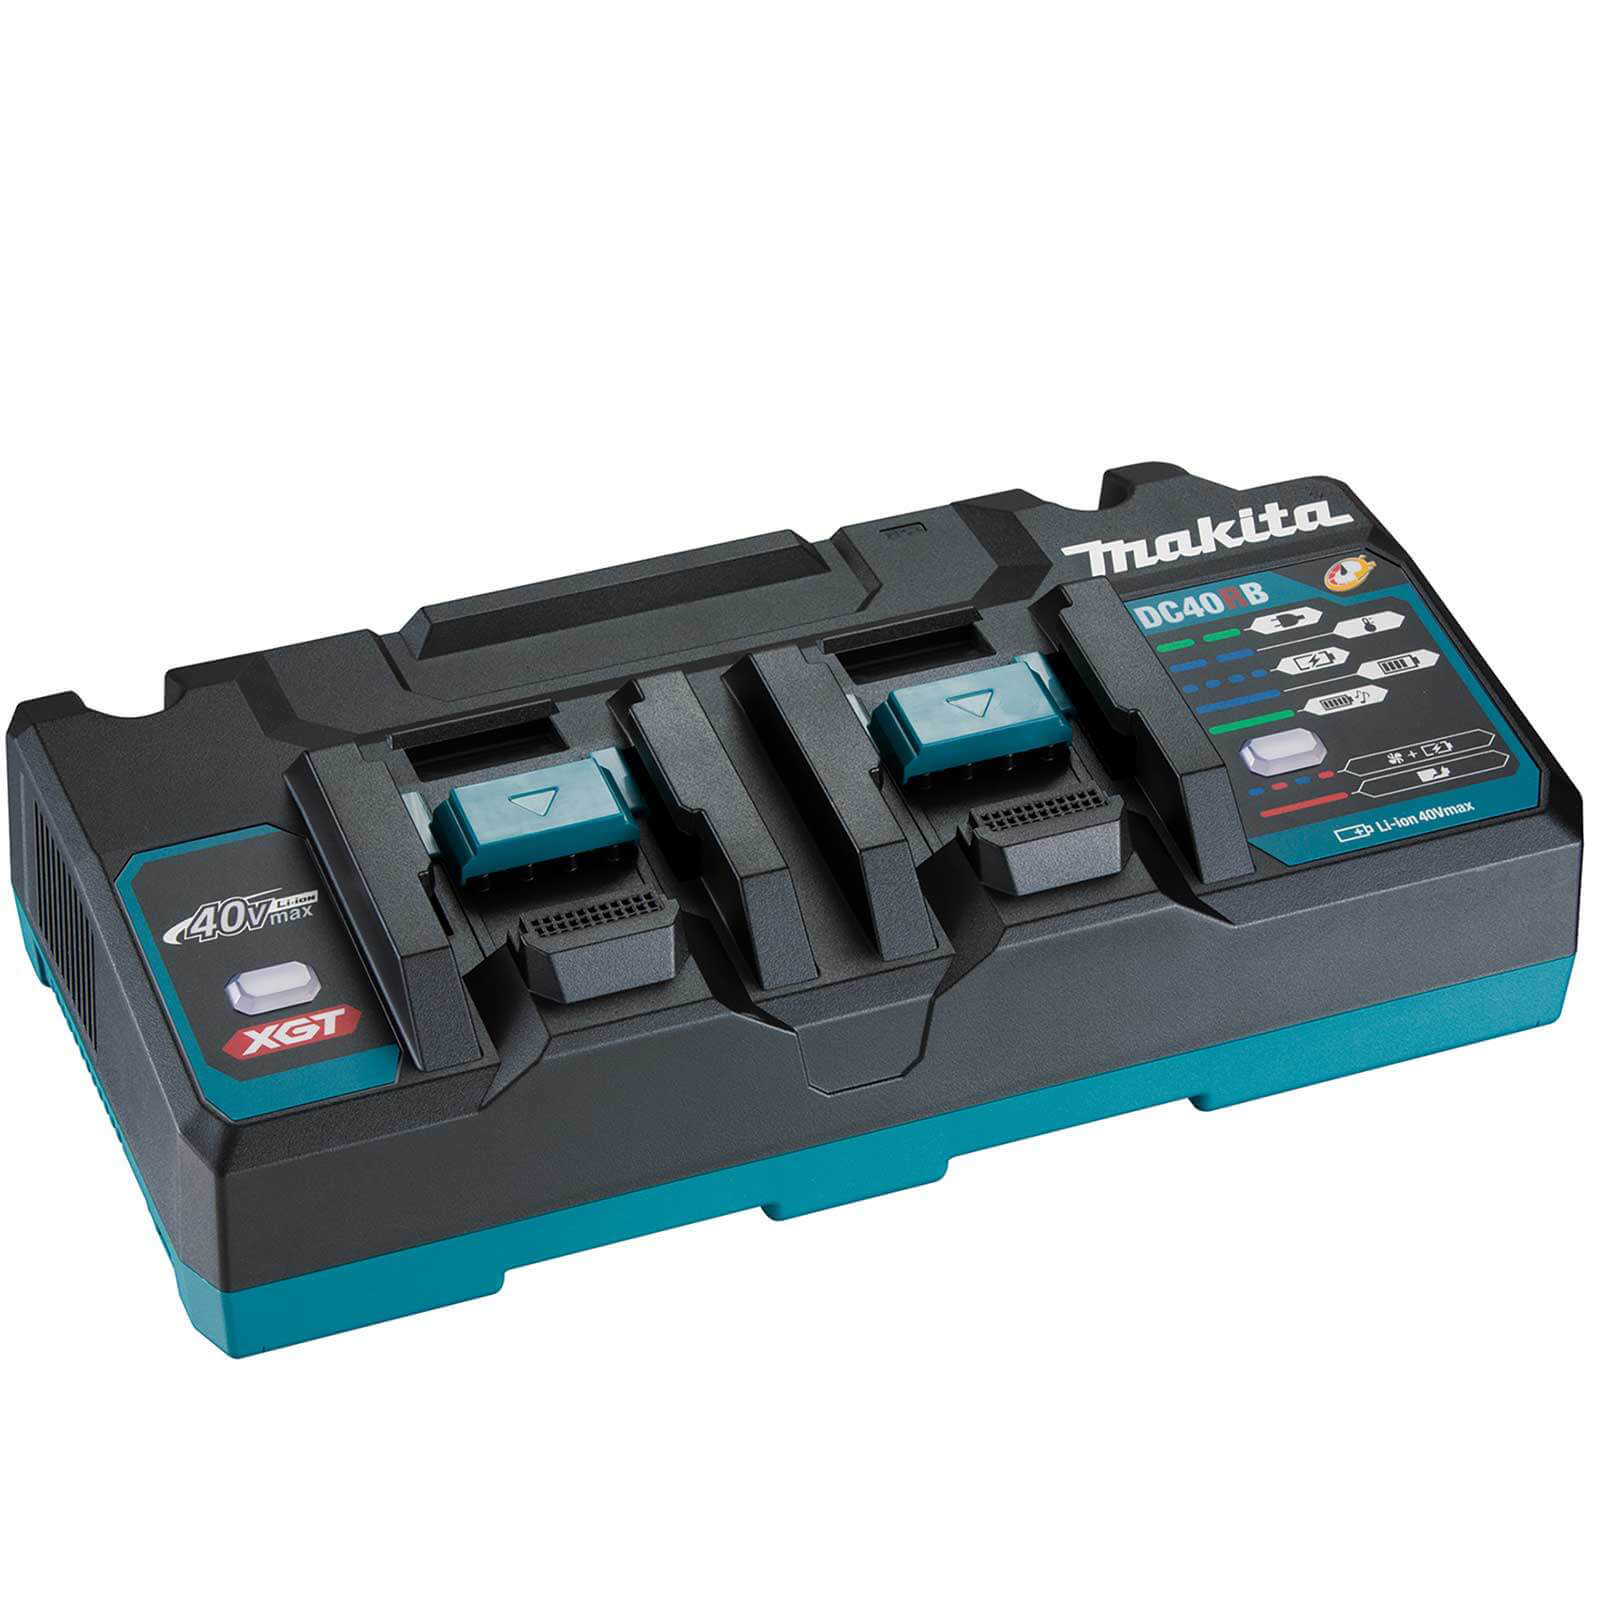 Image of Makita DC40RB 40v Max XGT Twin Port Battery Fast Charger 240v